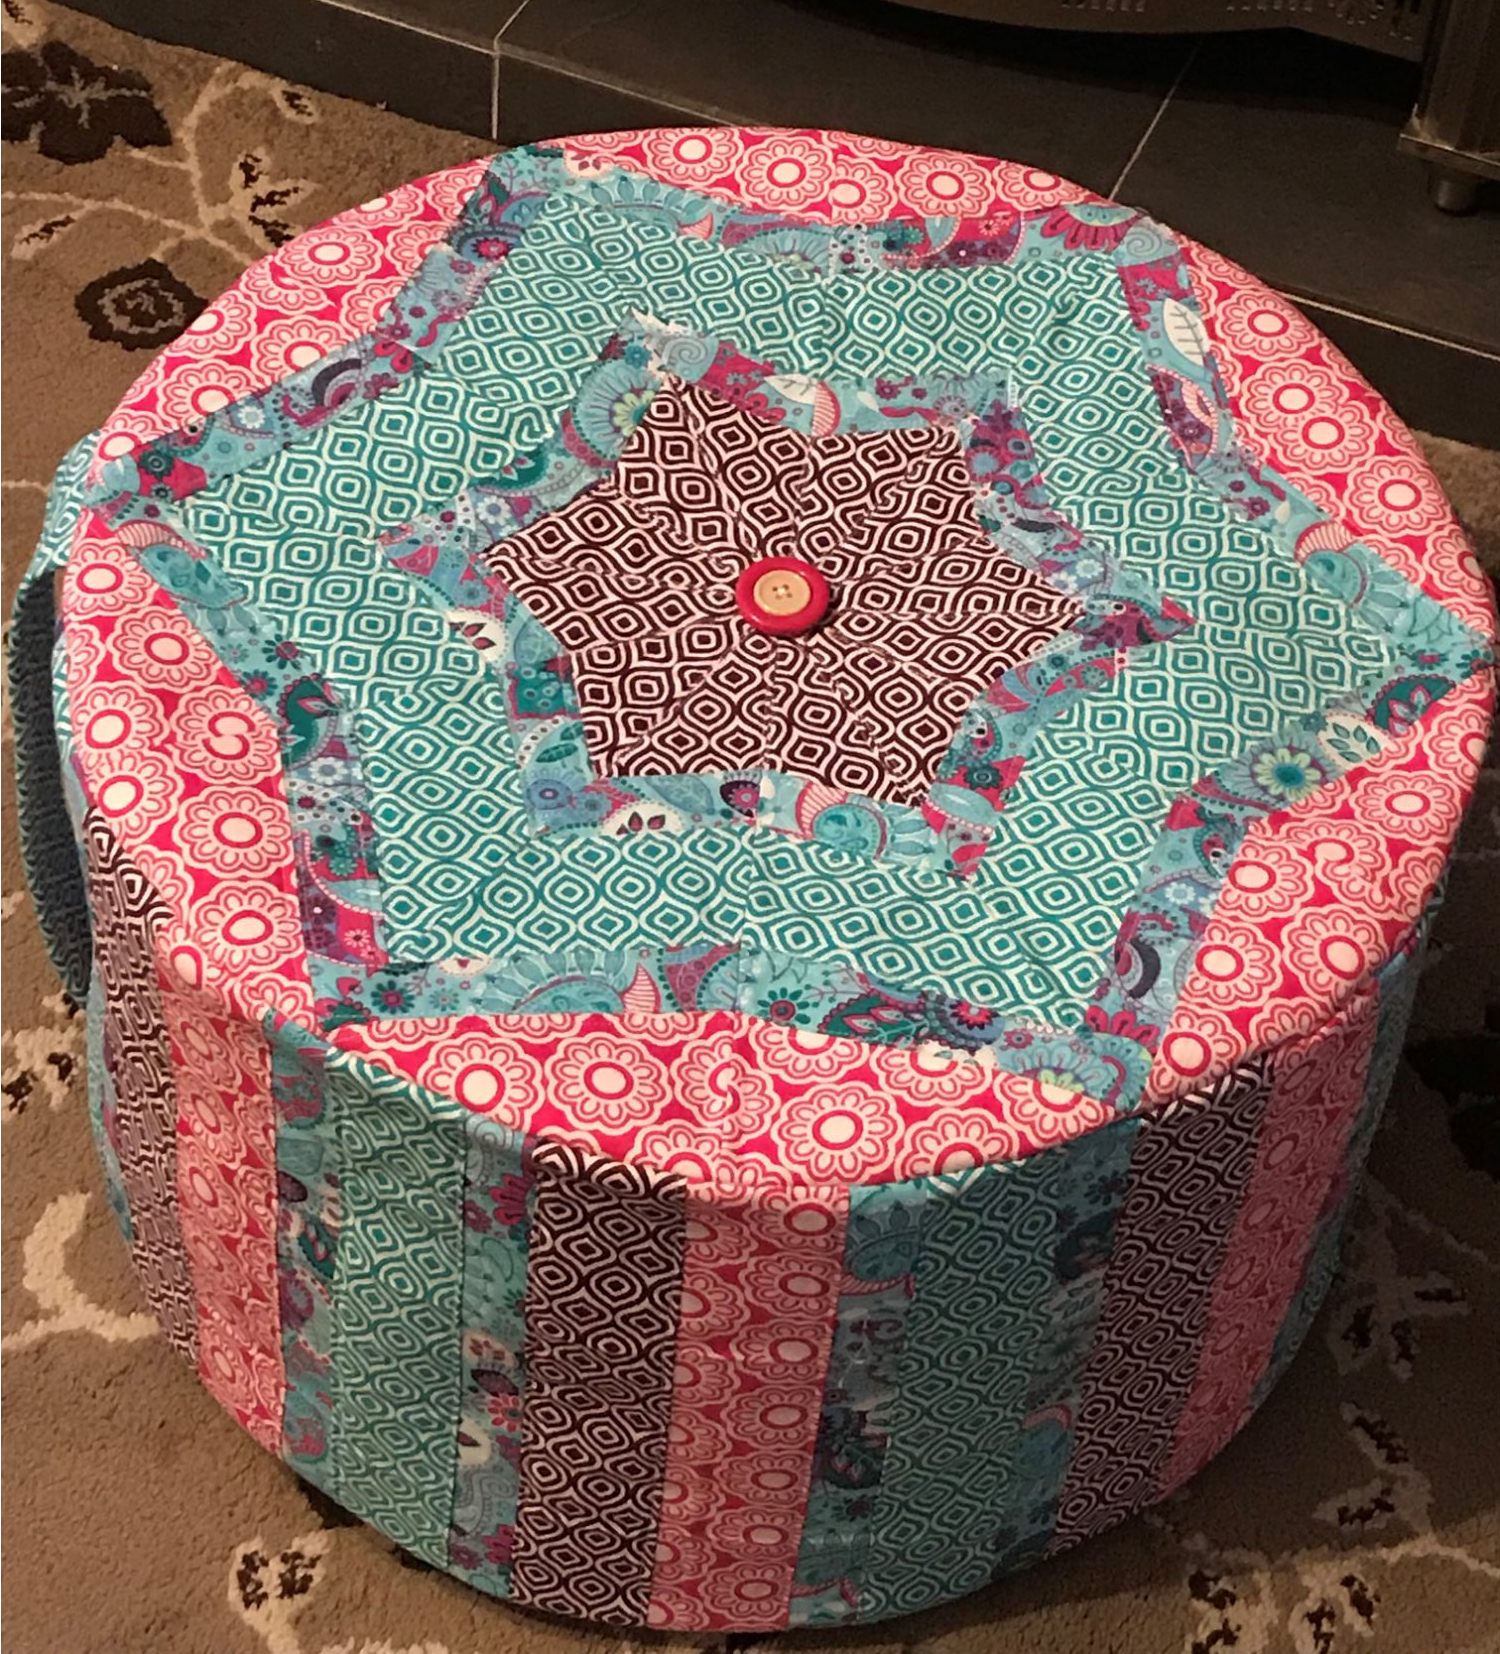 Debby's Patch quilted pouffe poof